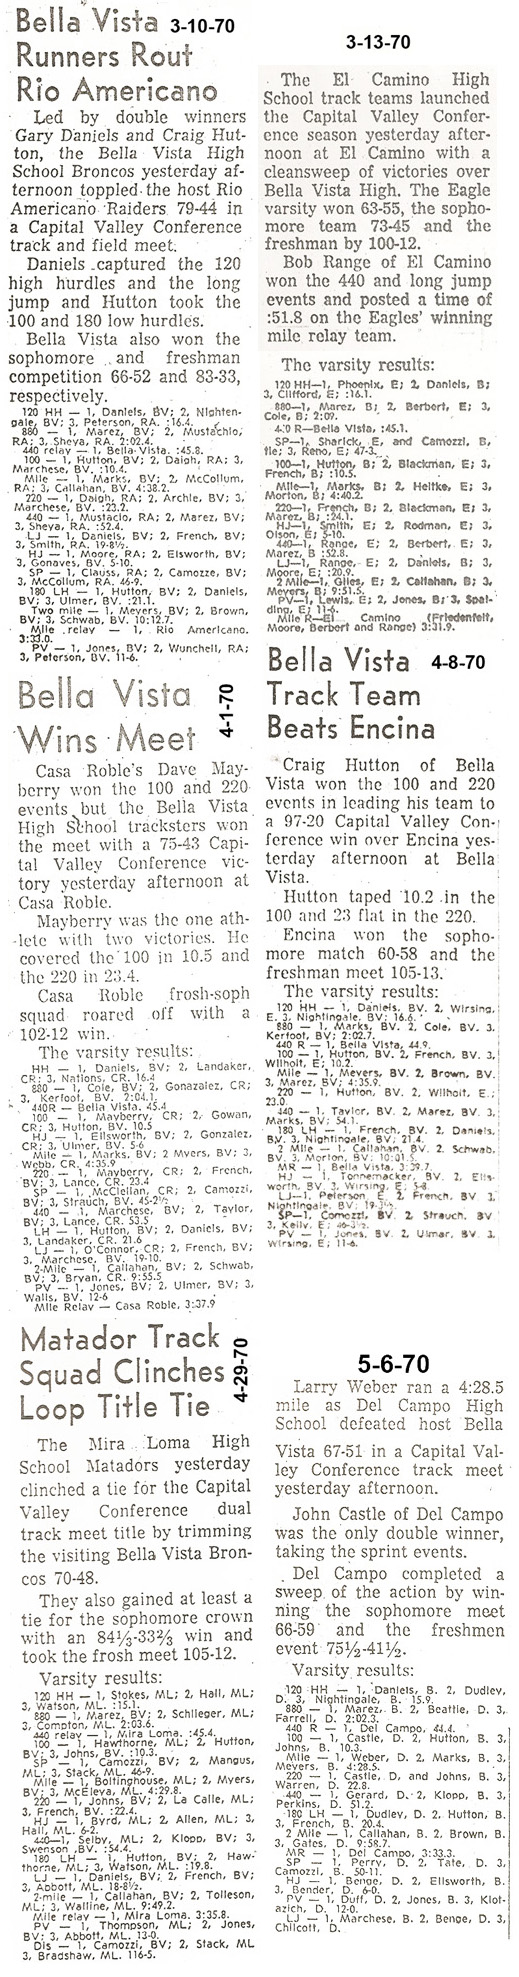 1970 BV Track Dual Results